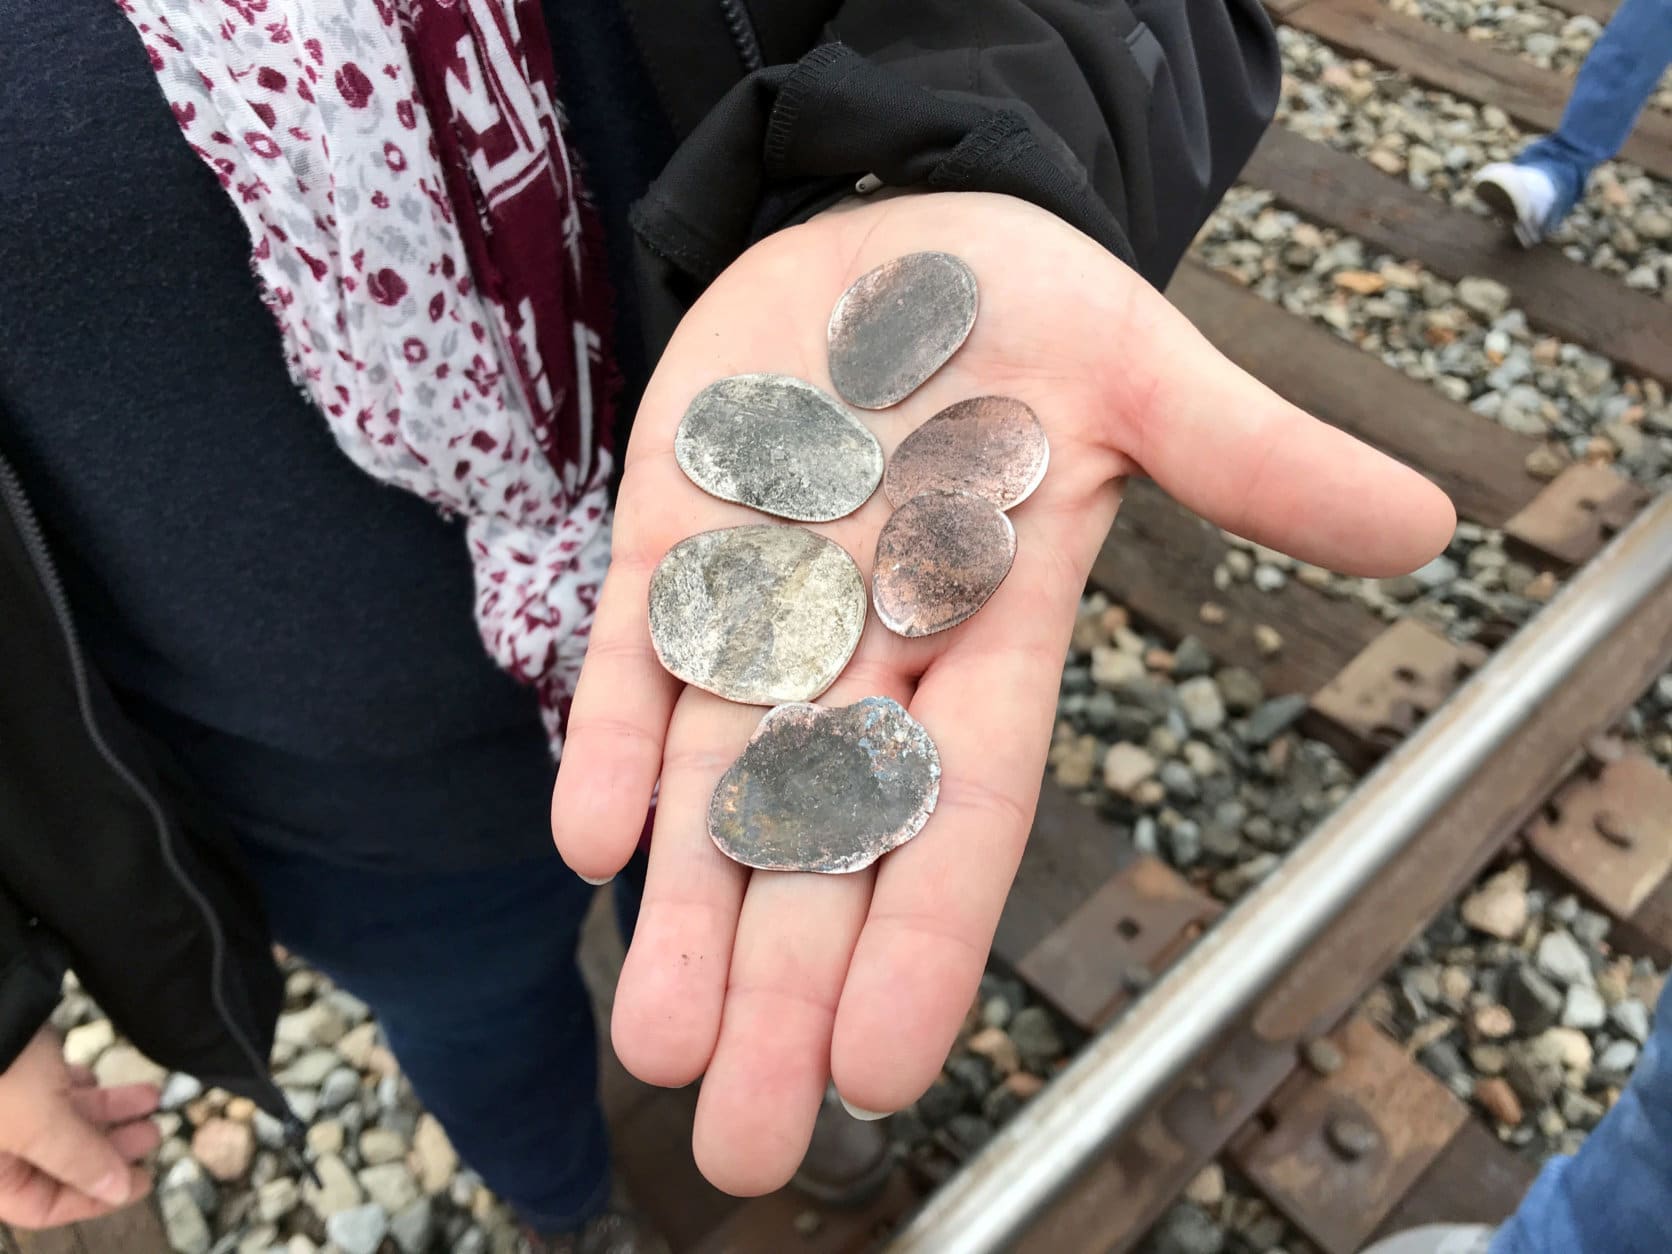 Ana Garza, of Cypress, Texas, displays coins flattened by the memorial train carrying the casket of President George H.W. Bush when it passed through Pinehurst, Texas, Thursday, Dec. 6, 2018. On Thursday, that same 4,300-horsepower machine left a suburban Houston railyard loaded with Bush's casket for his final journey after almost a week of ceremonies in Washington and Texas. (AP Photo/Nomaan Merchant)